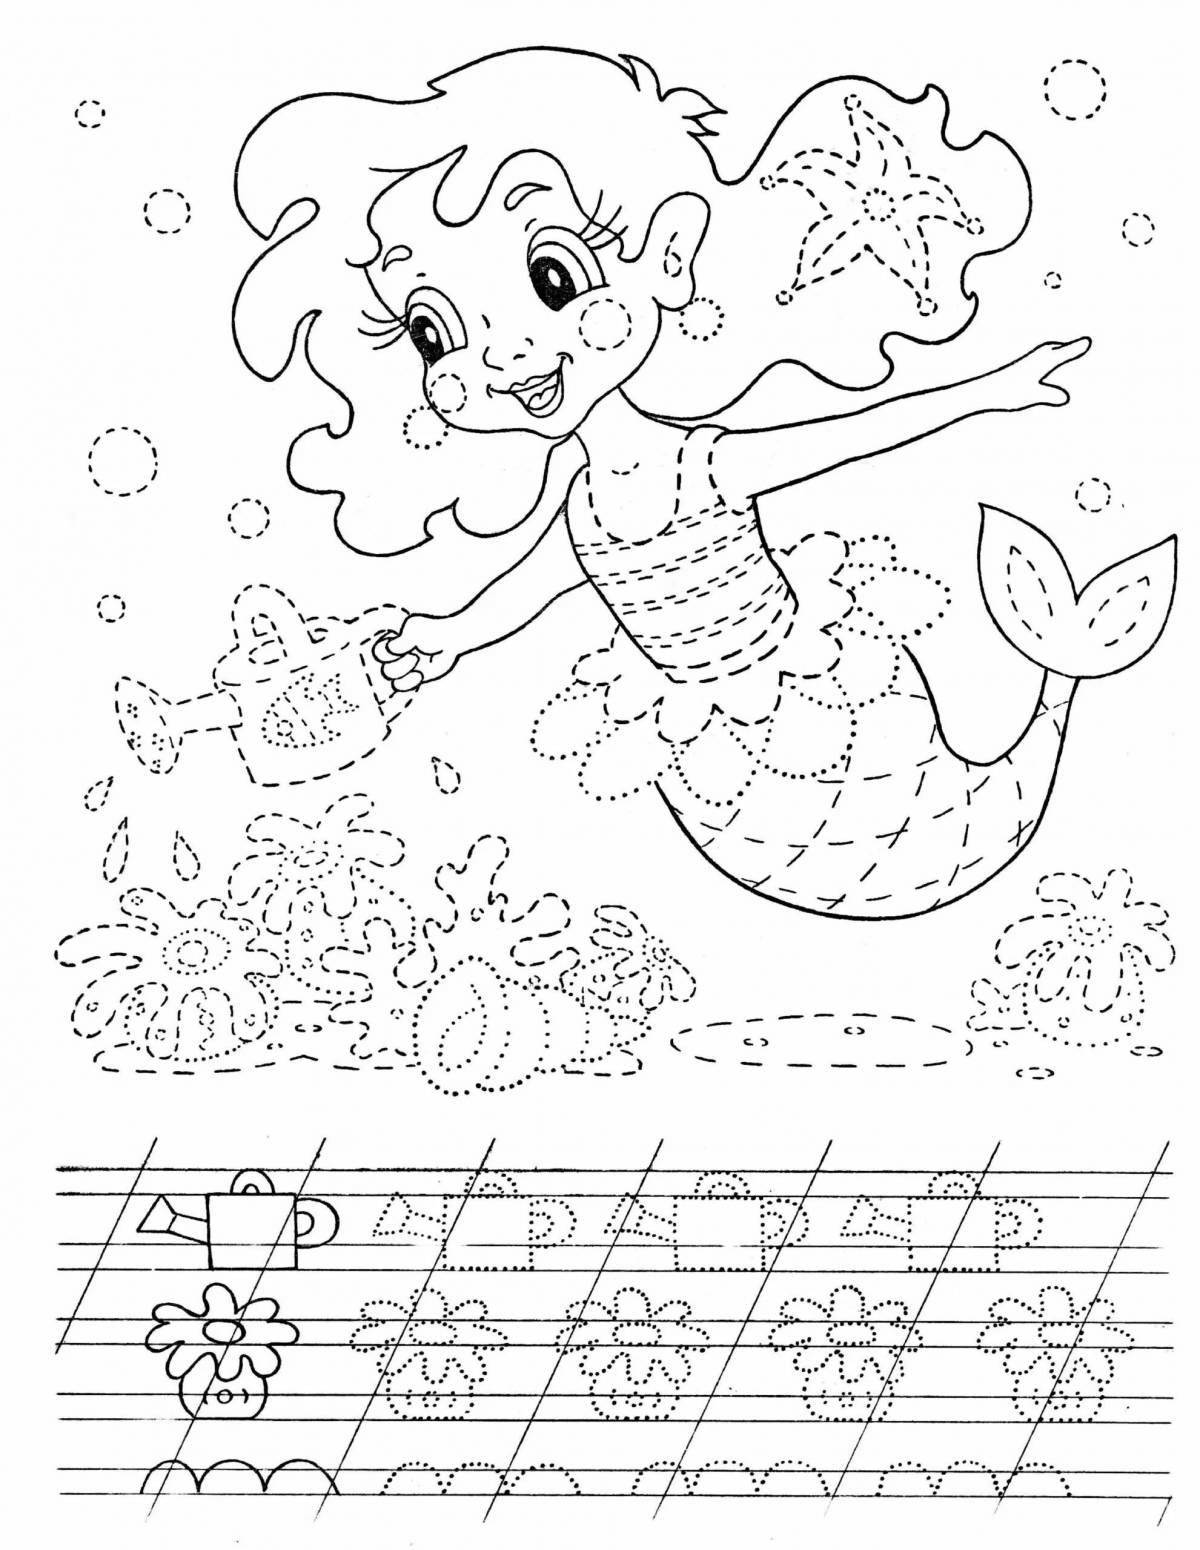 Adorable recipe coloring page for kids